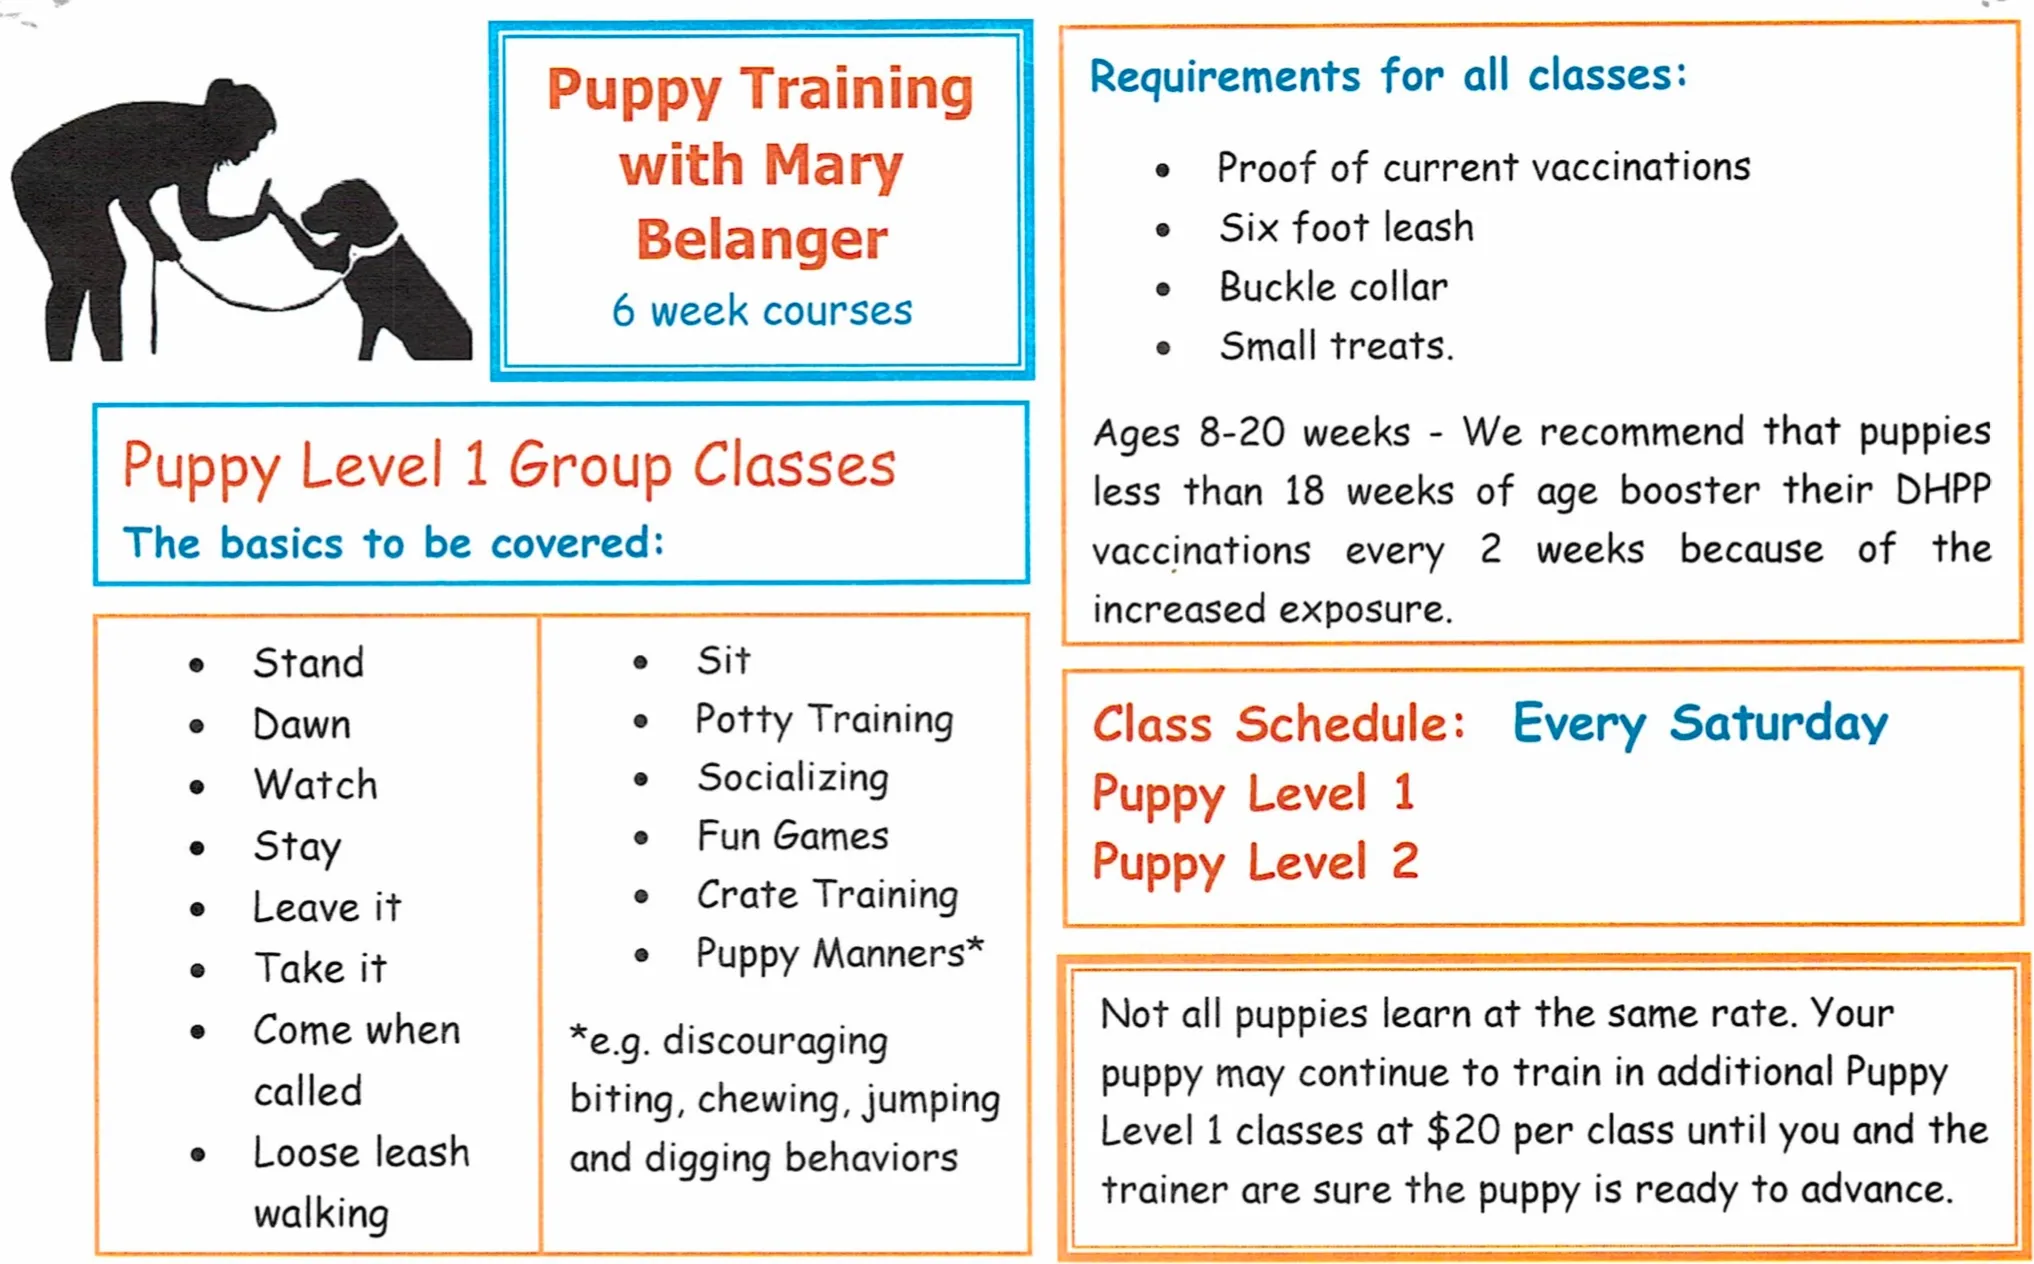 group classes